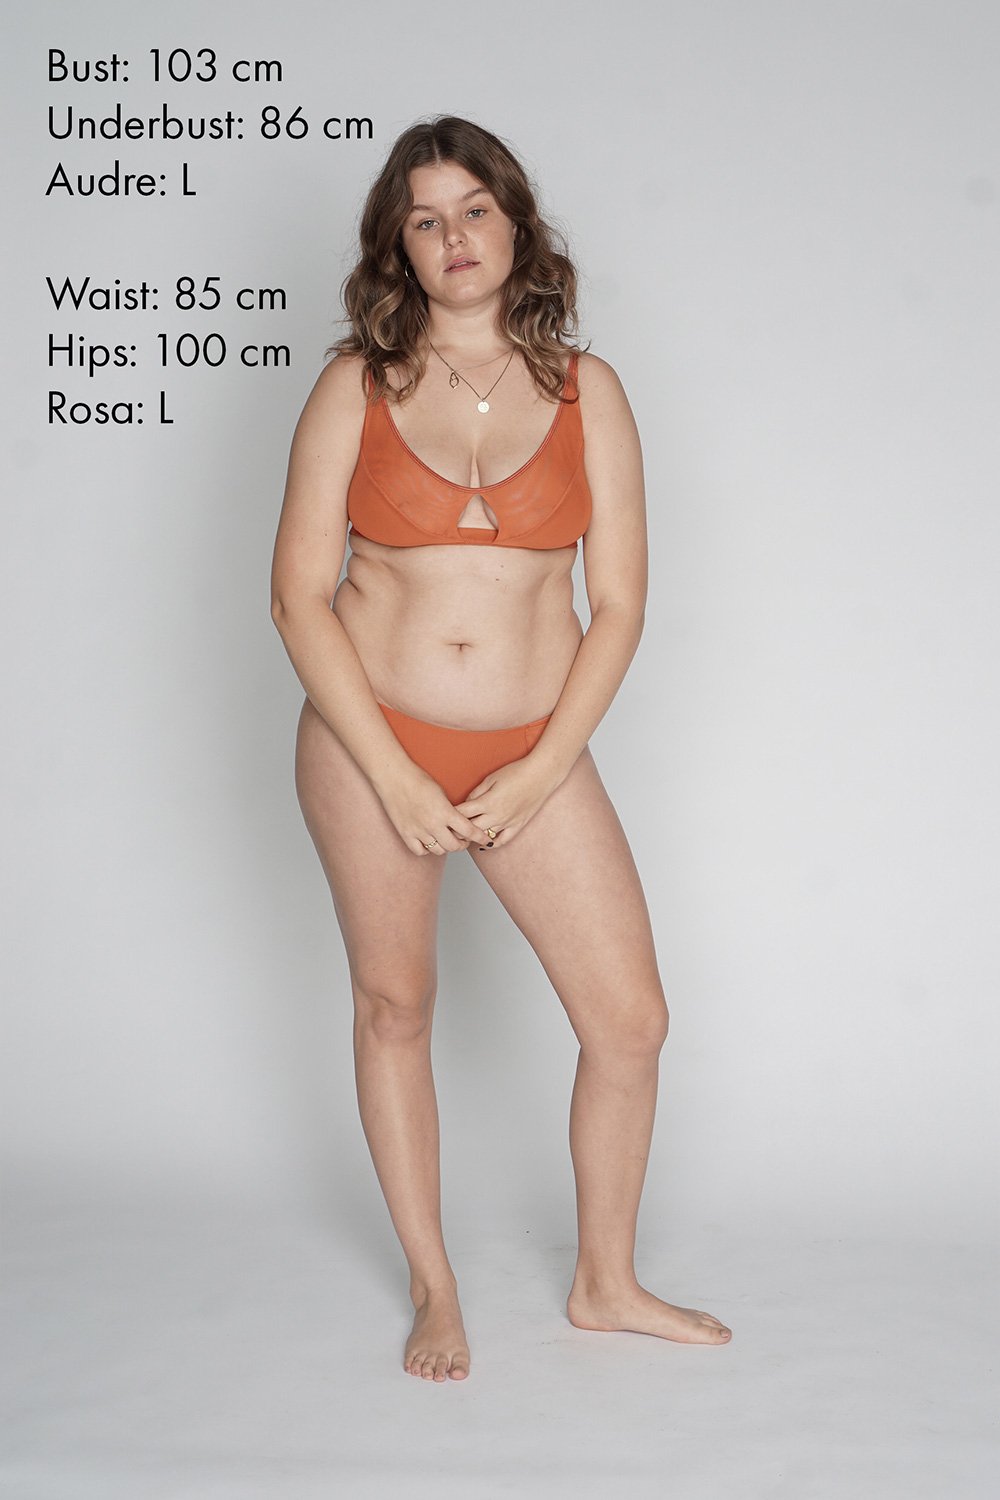 TwiinsBra - FIND YOUR PERFECT SIZE! . At TwiinsBra we have